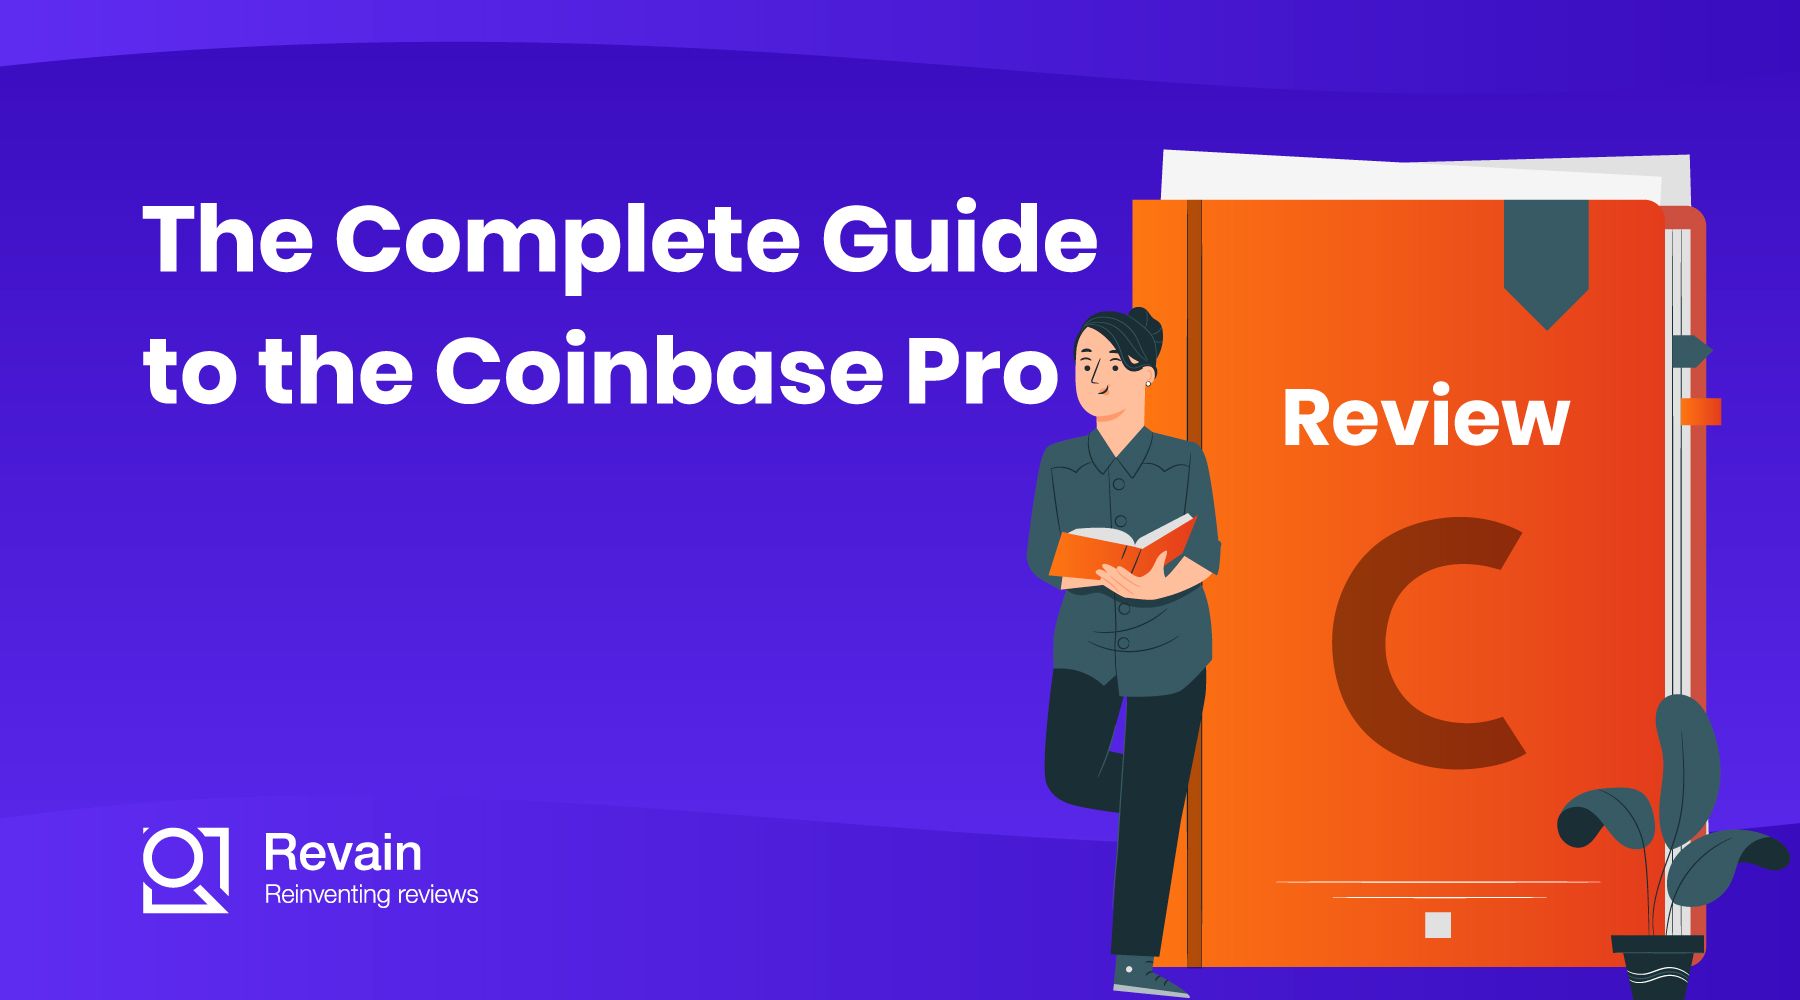 The Complete Guide to the Coinbase Pro Exchange